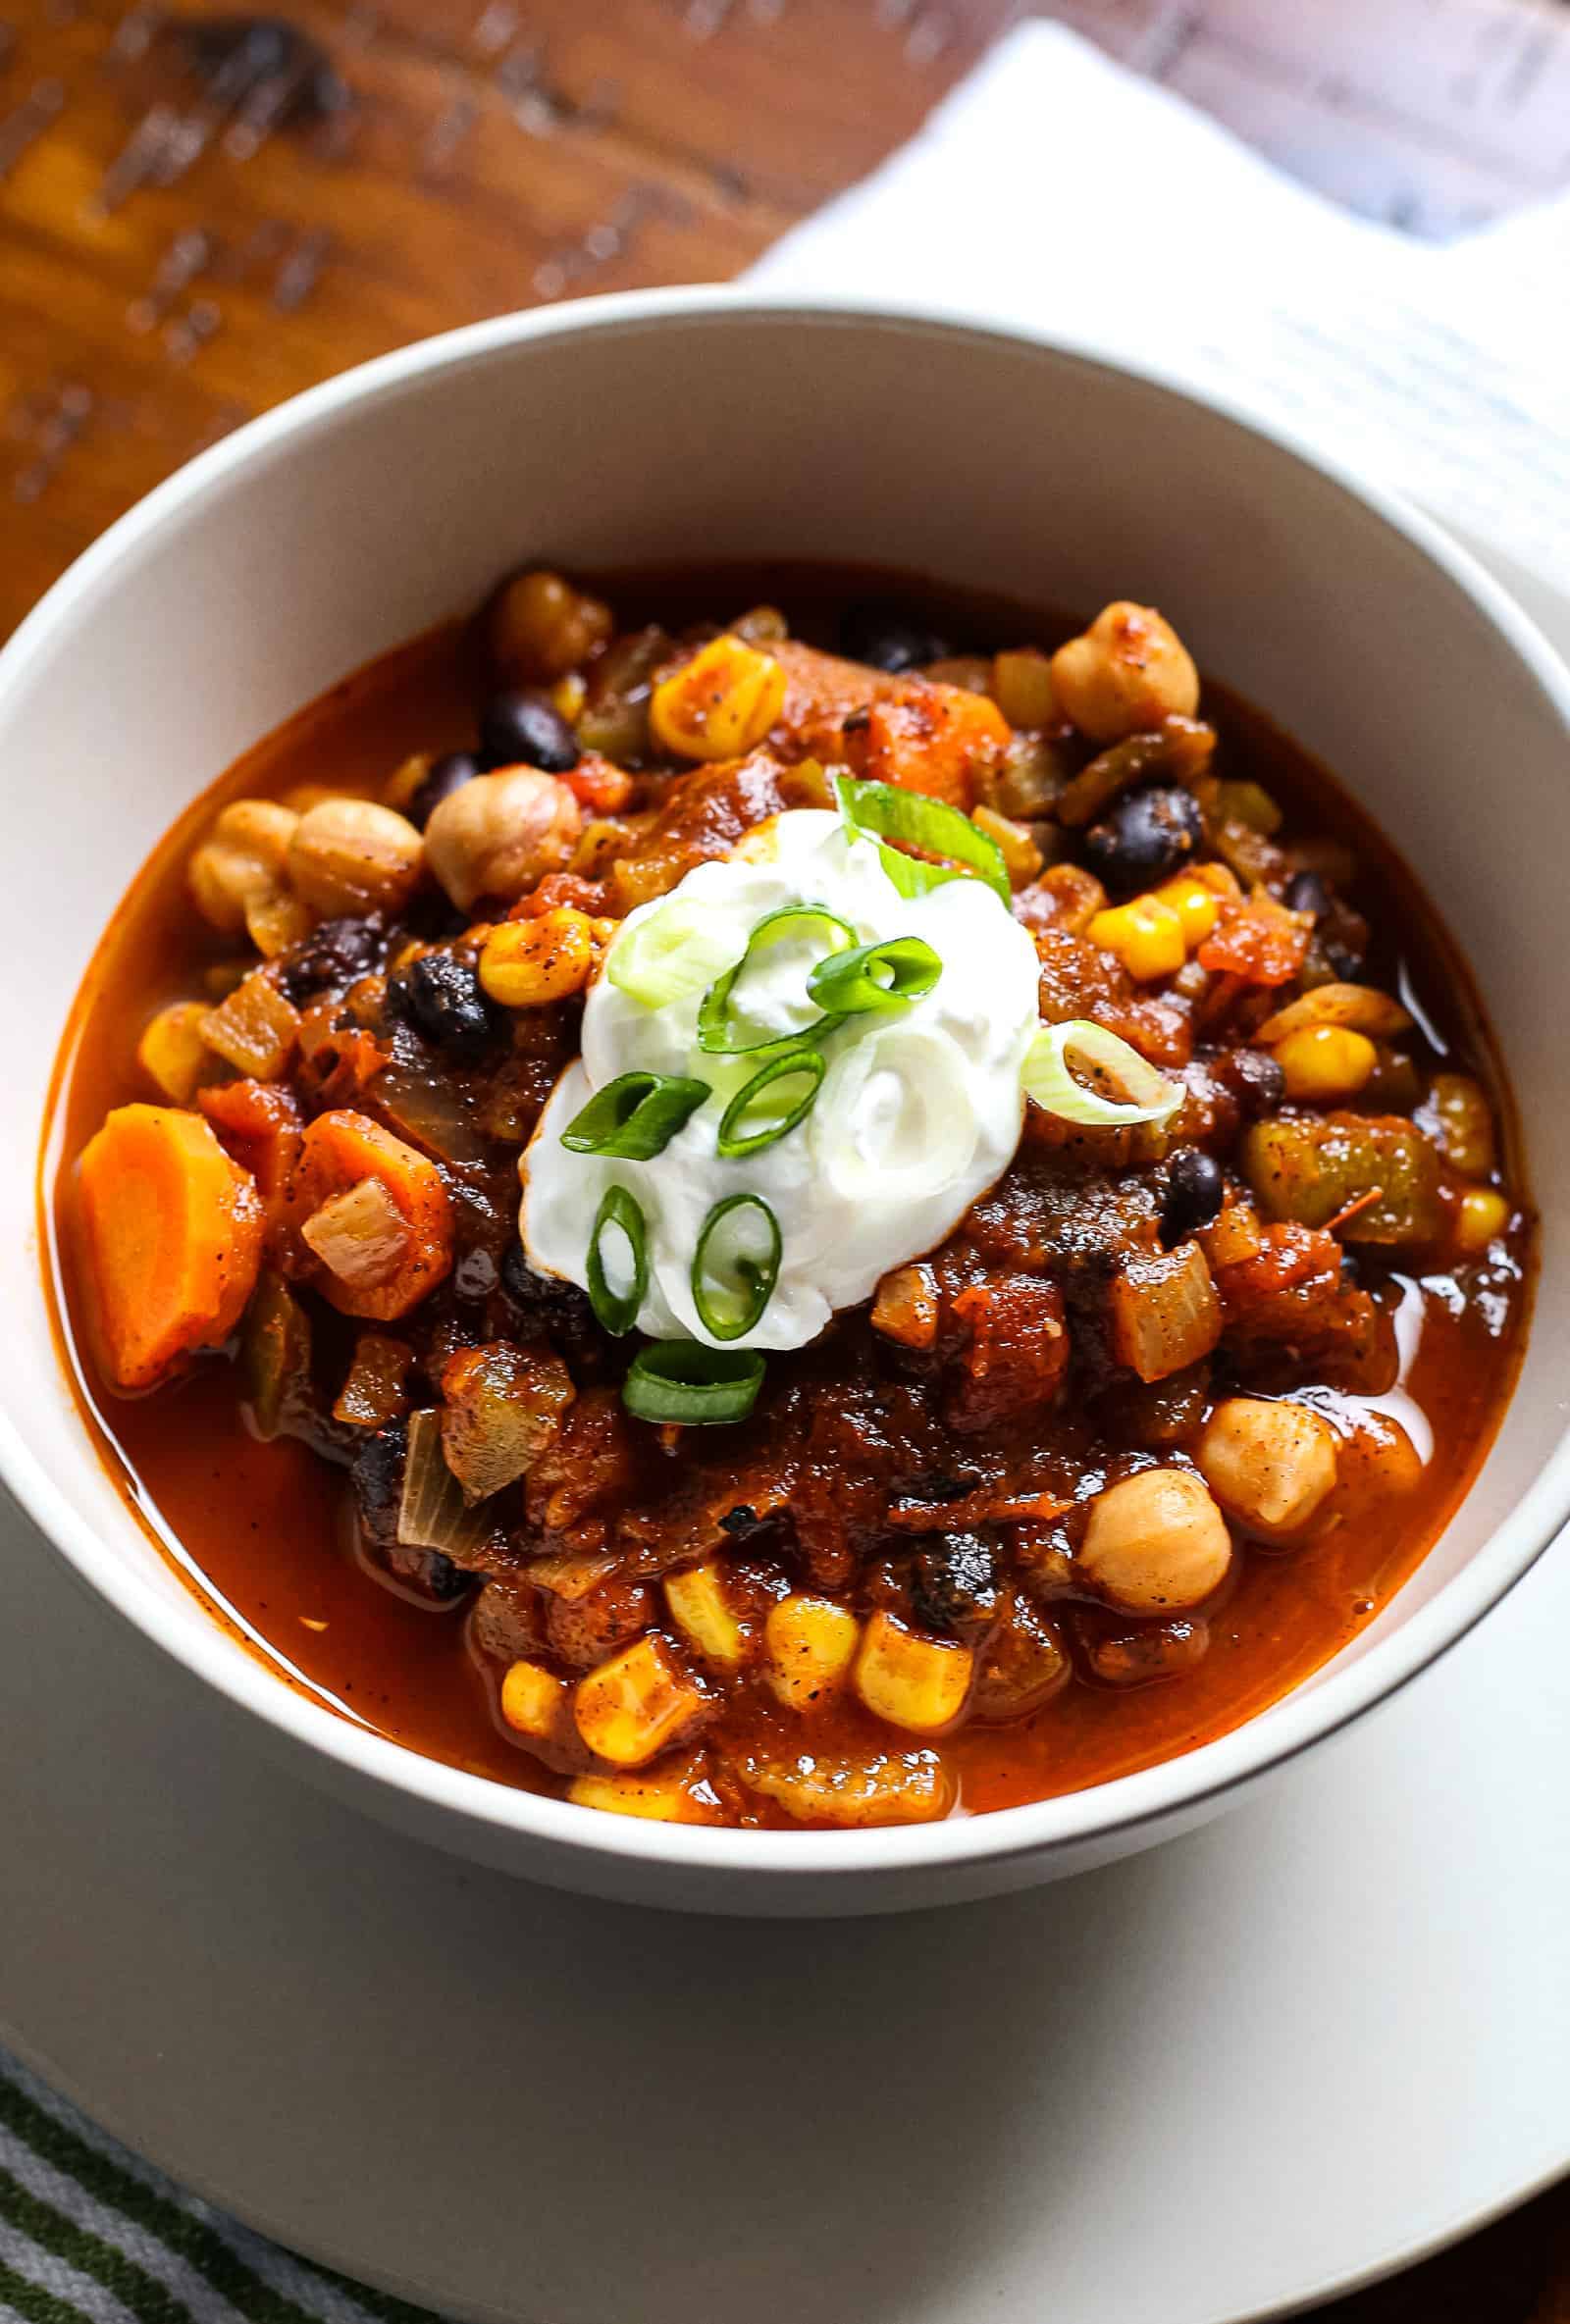 Bowl of vegetarian chili topped with sour cream and chopped green onions.